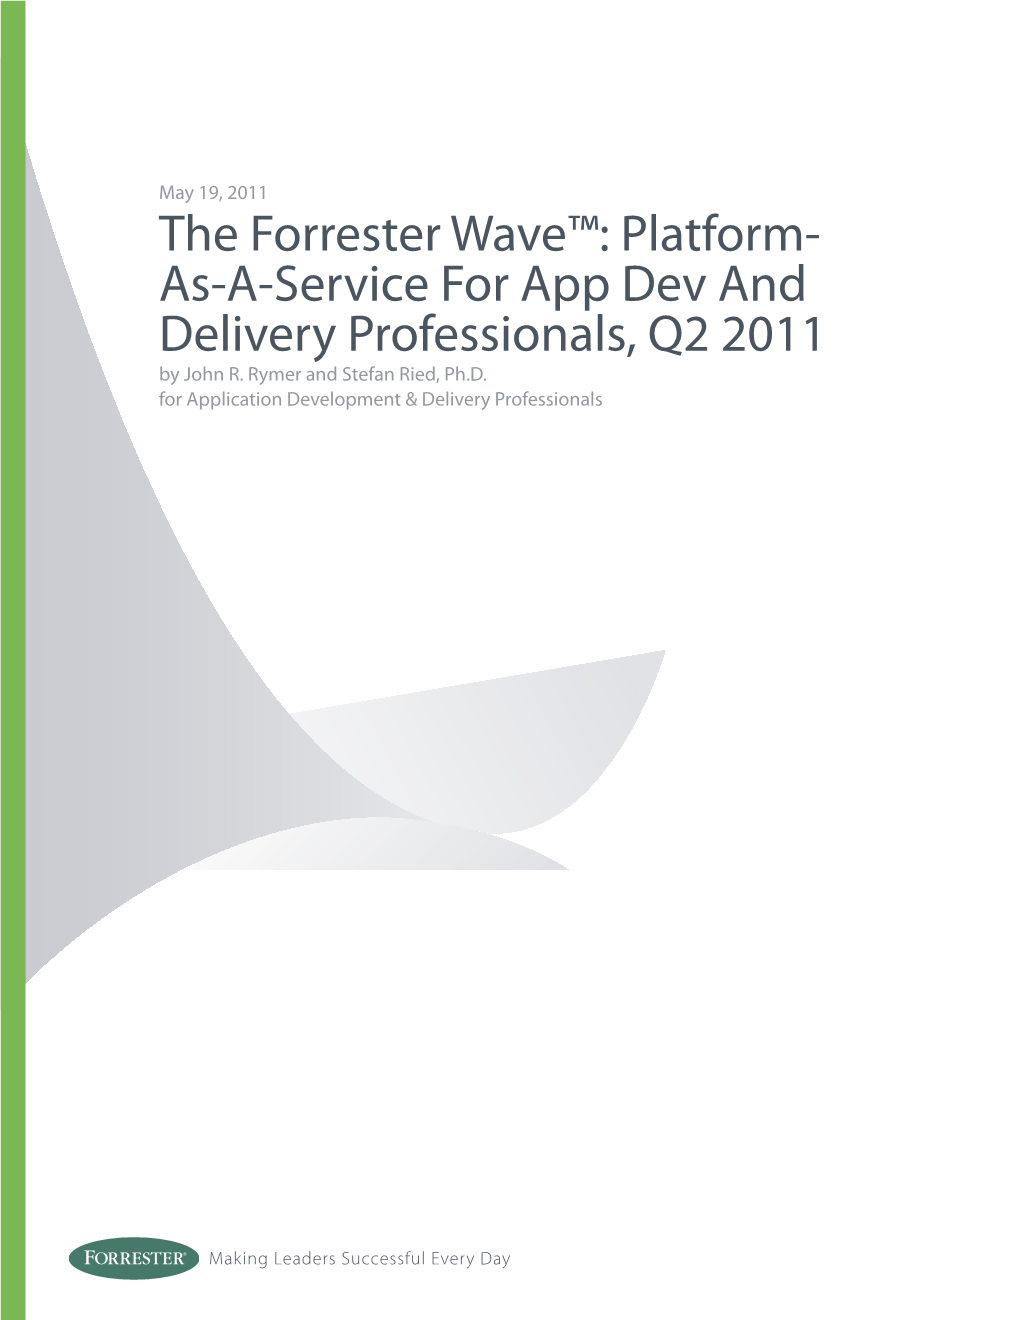 The Forrester Wave™: Platform- As-A-Service for App Dev and Delivery Professionals, Q2 2011 by John R